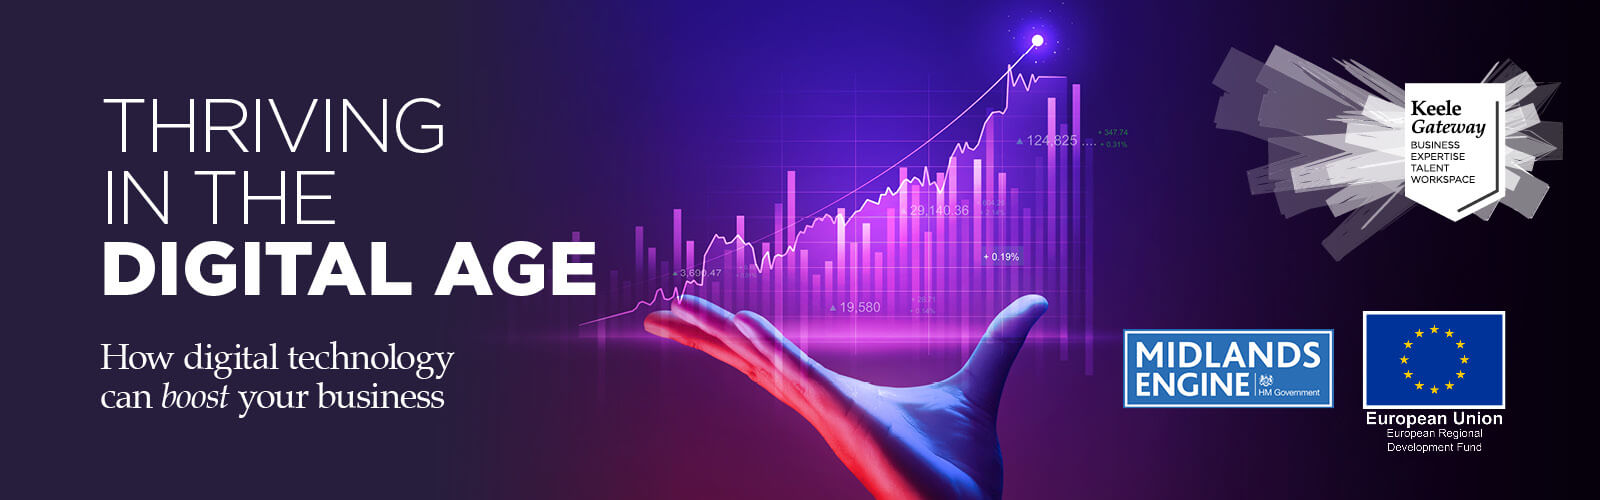 Hand 'holding' a graphic of a bar chart showing increase, purple and blue hues. Text overlay 'Thriving in the Digital Age, How digital technology can boost your business', Keele Gateway, Midlands Engine and ERDF logo.